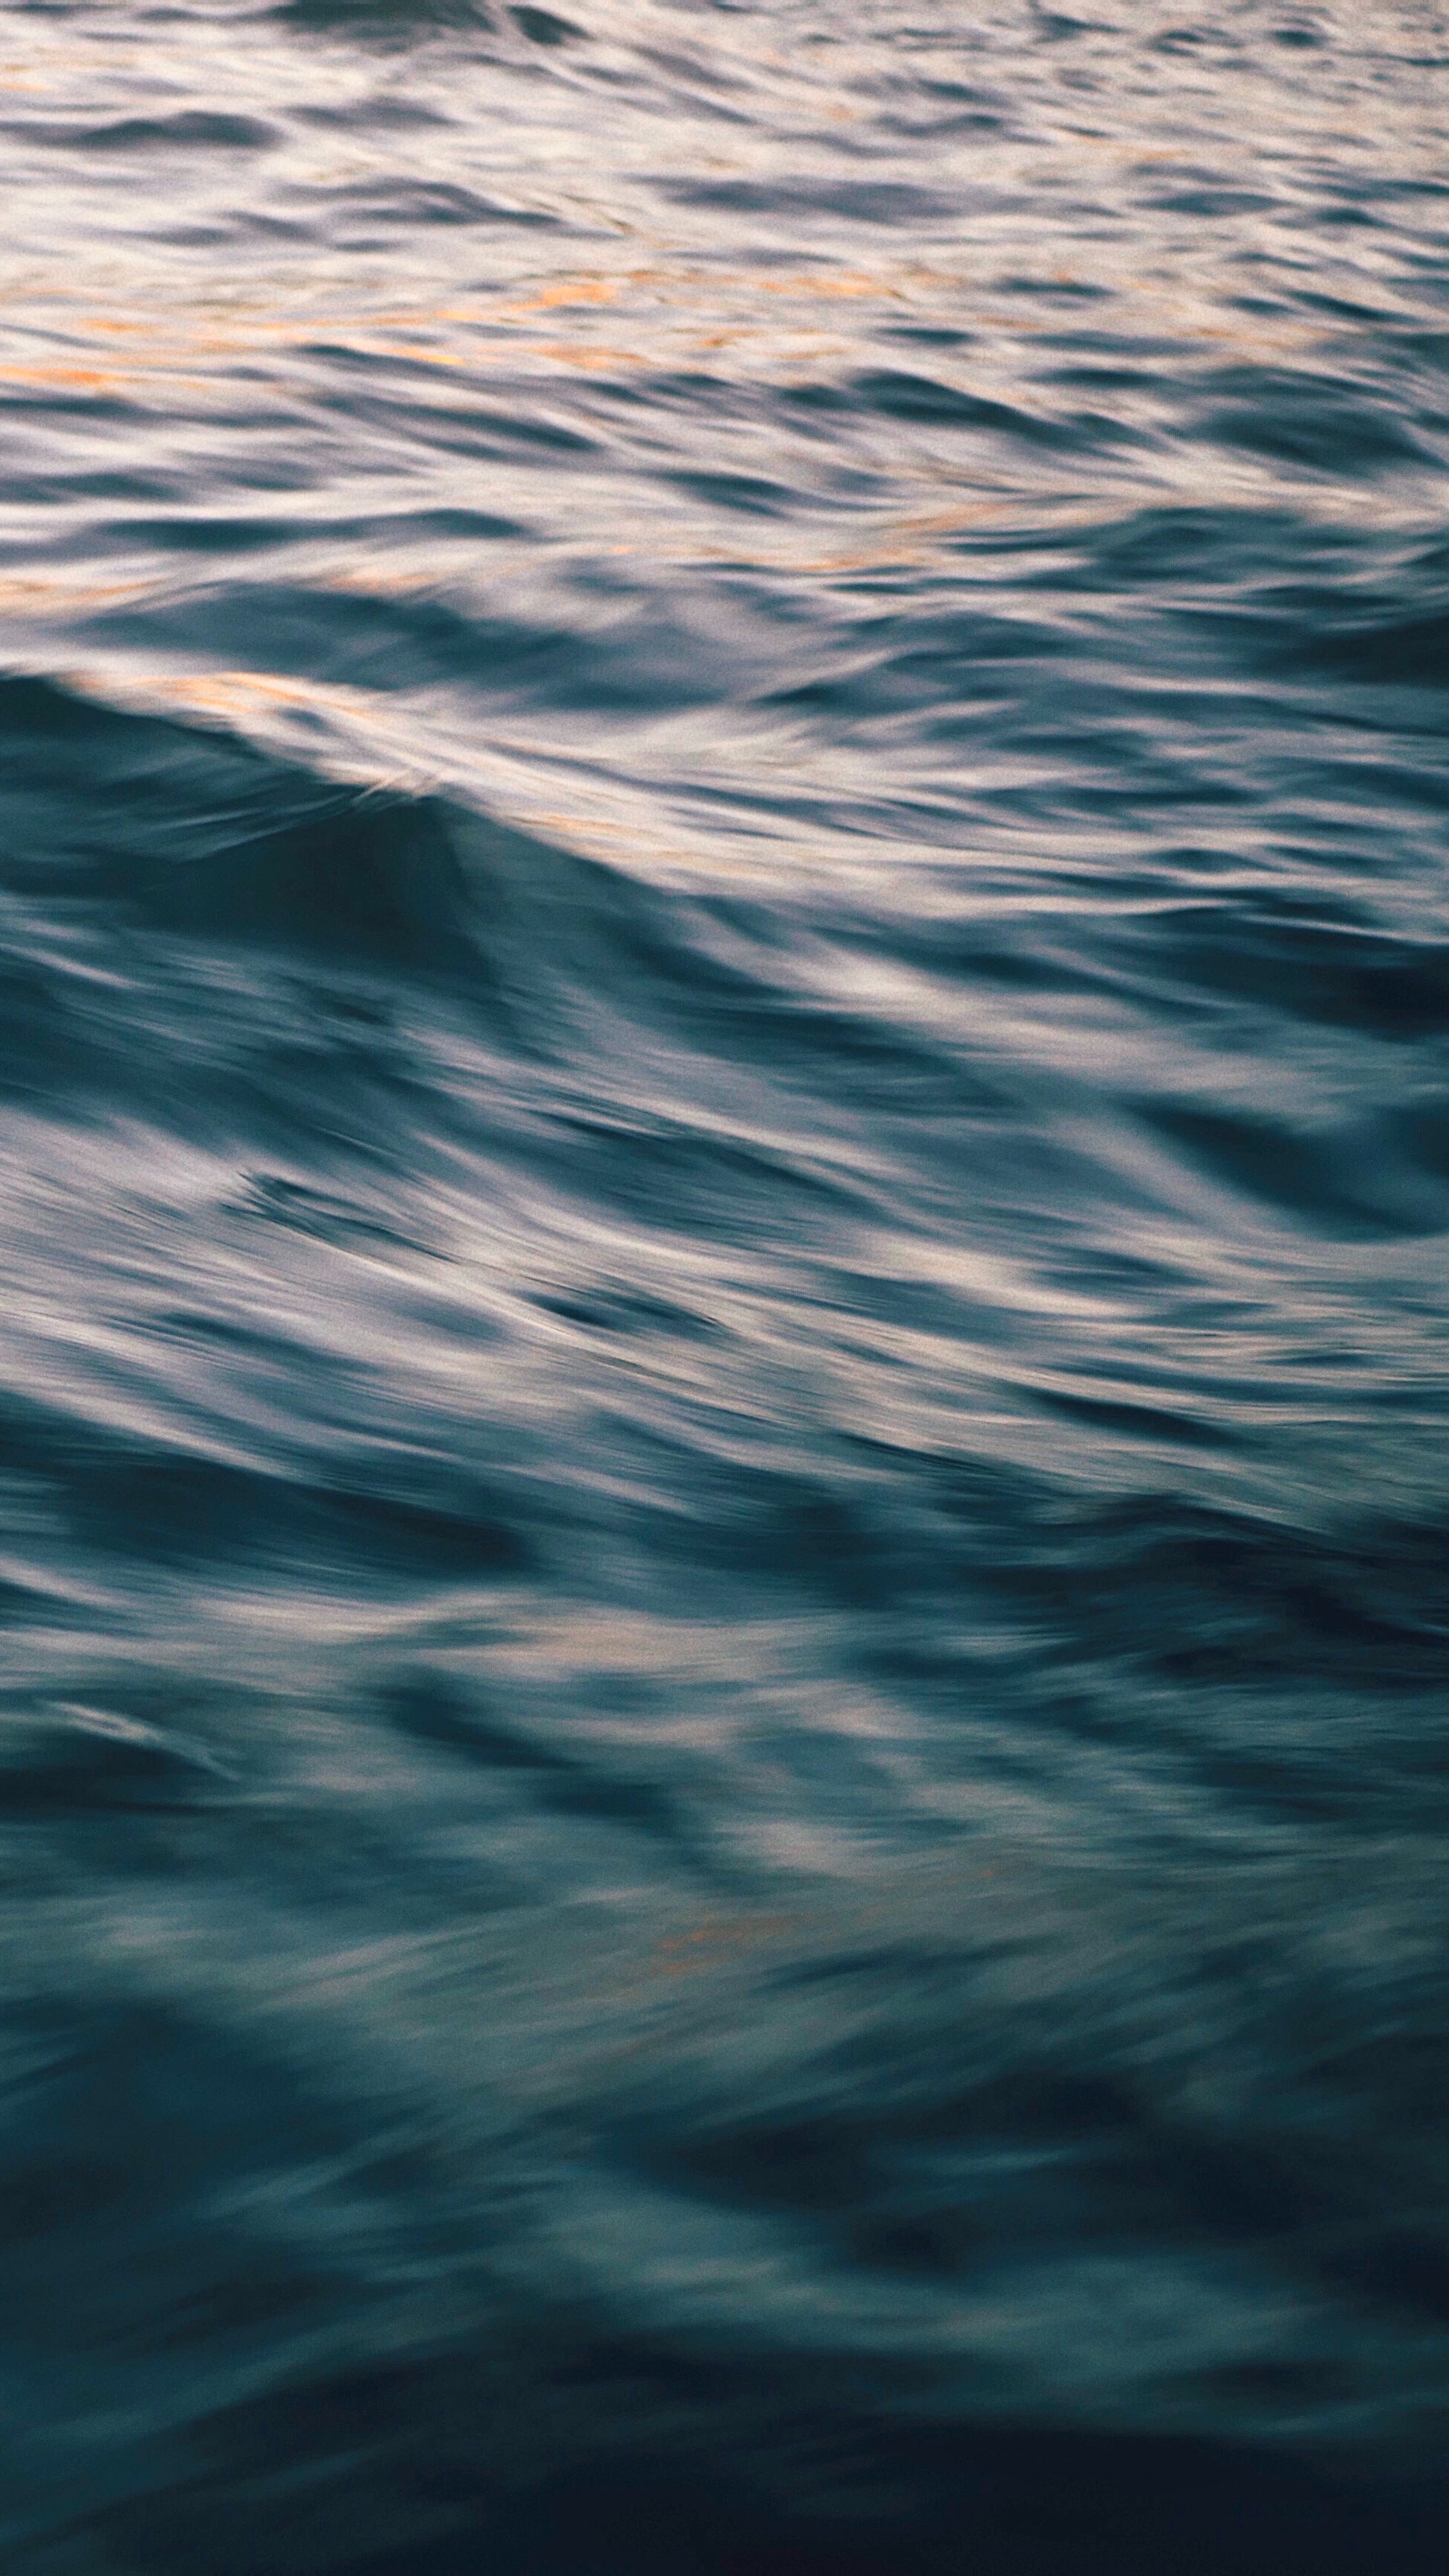 Windows Backgrounds water, waves, ripples, ripple, texture, textures, wavy, distortion